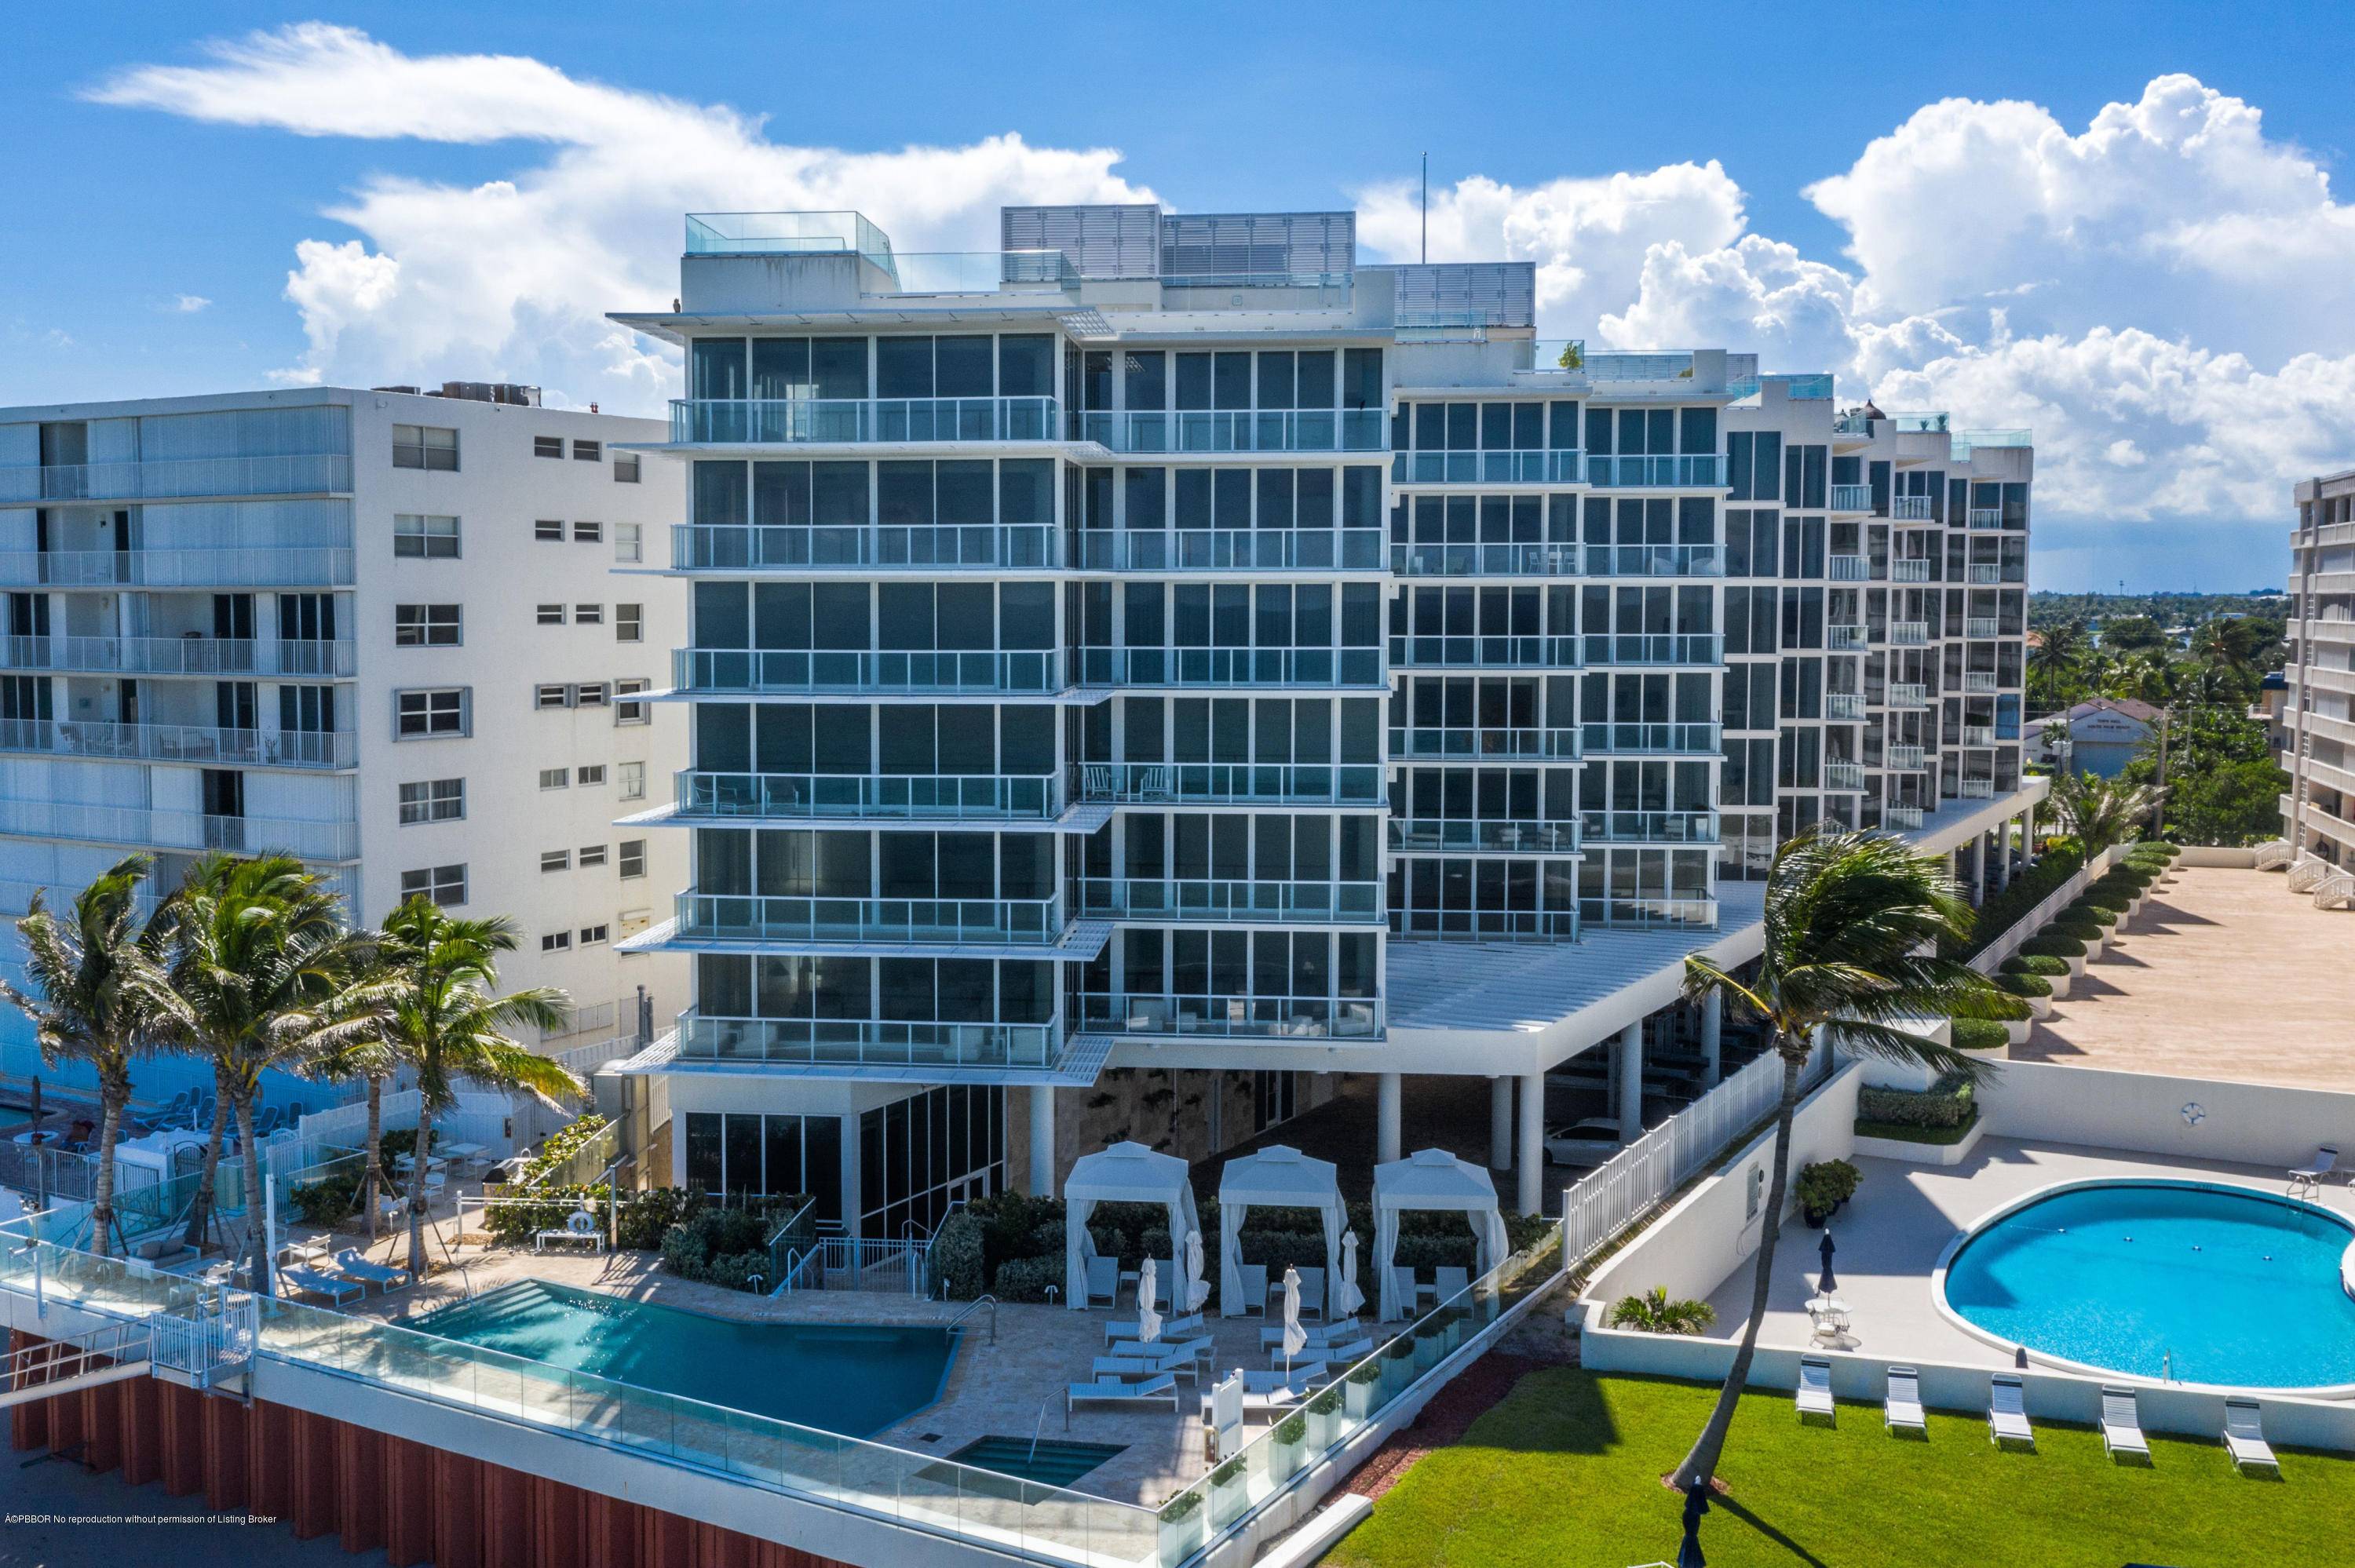 New Move in Ready Palm Beach Condos Offer the Ultimate in Upscale Luxury Living !